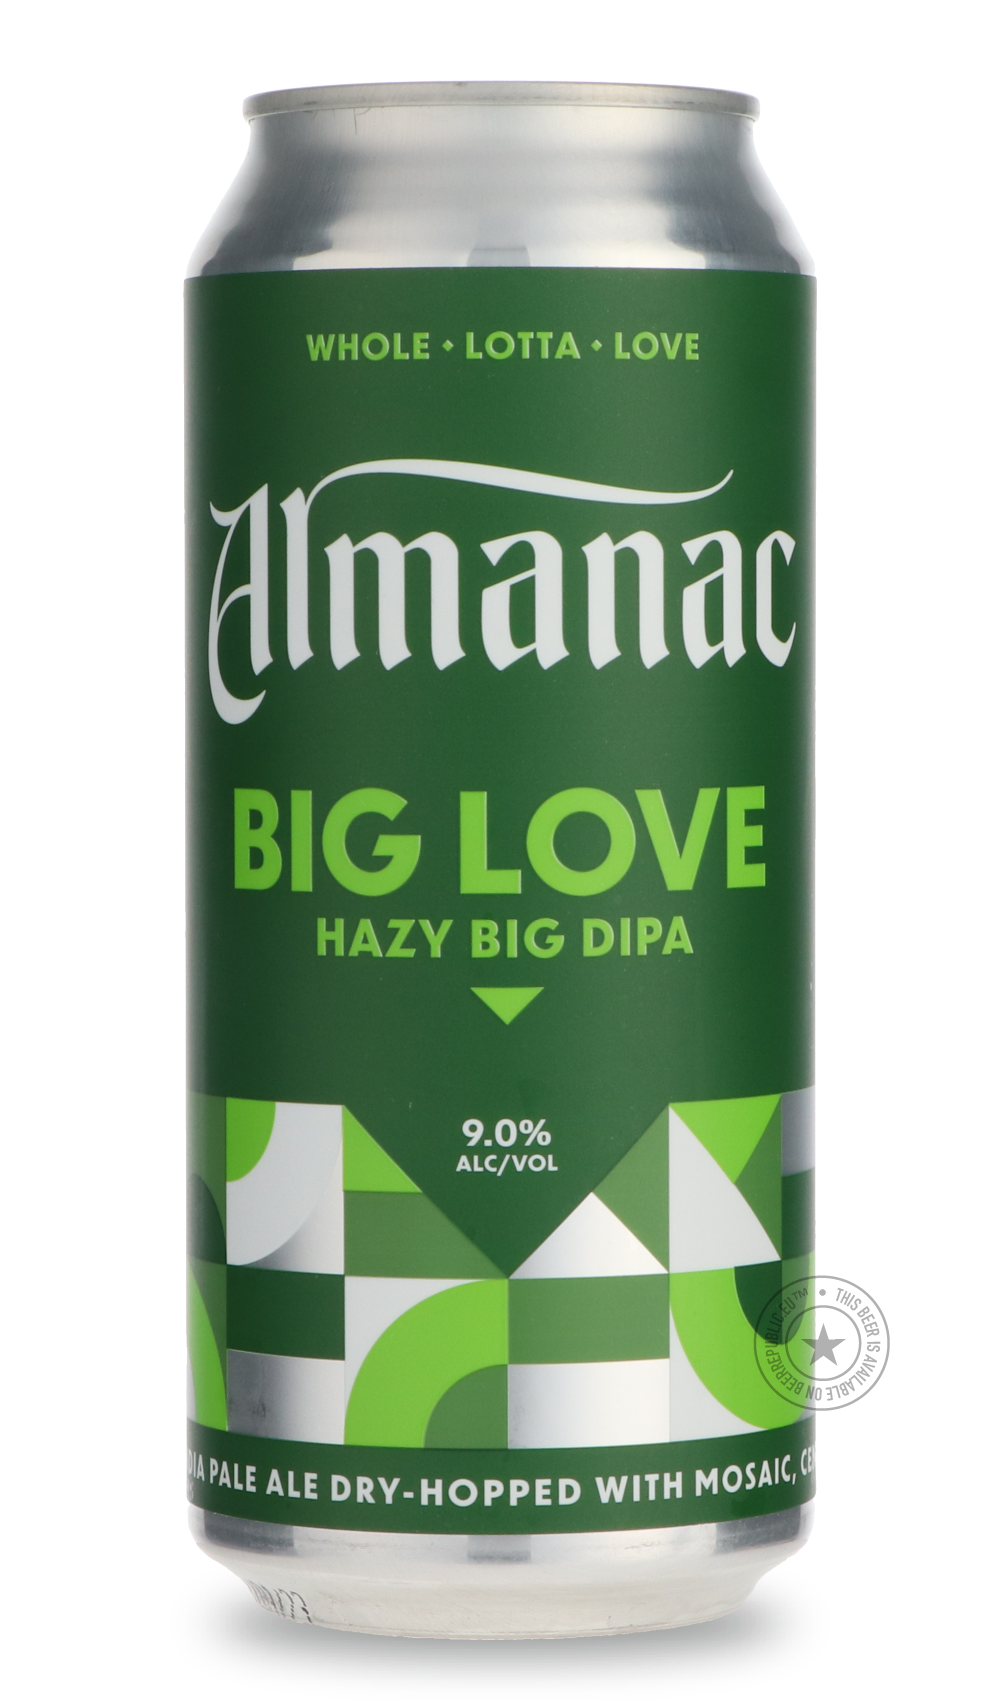 -Almanac- Big Love-IPA- Only @ Beer Republic - The best online beer store for American & Canadian craft beer - Buy beer online from the USA and Canada - Bier online kopen - Amerikaans bier kopen - Craft beer store - Craft beer kopen - Amerikanisch bier kaufen - Bier online kaufen - Acheter biere online - IPA - Stout - Porter - New England IPA - Hazy IPA - Imperial Stout - Barrel Aged - Barrel Aged Imperial Stout - Brown - Dark beer - Blond - Blonde - Pilsner - Lager - Wheat - Weizen - Amber - Barley Wine - 